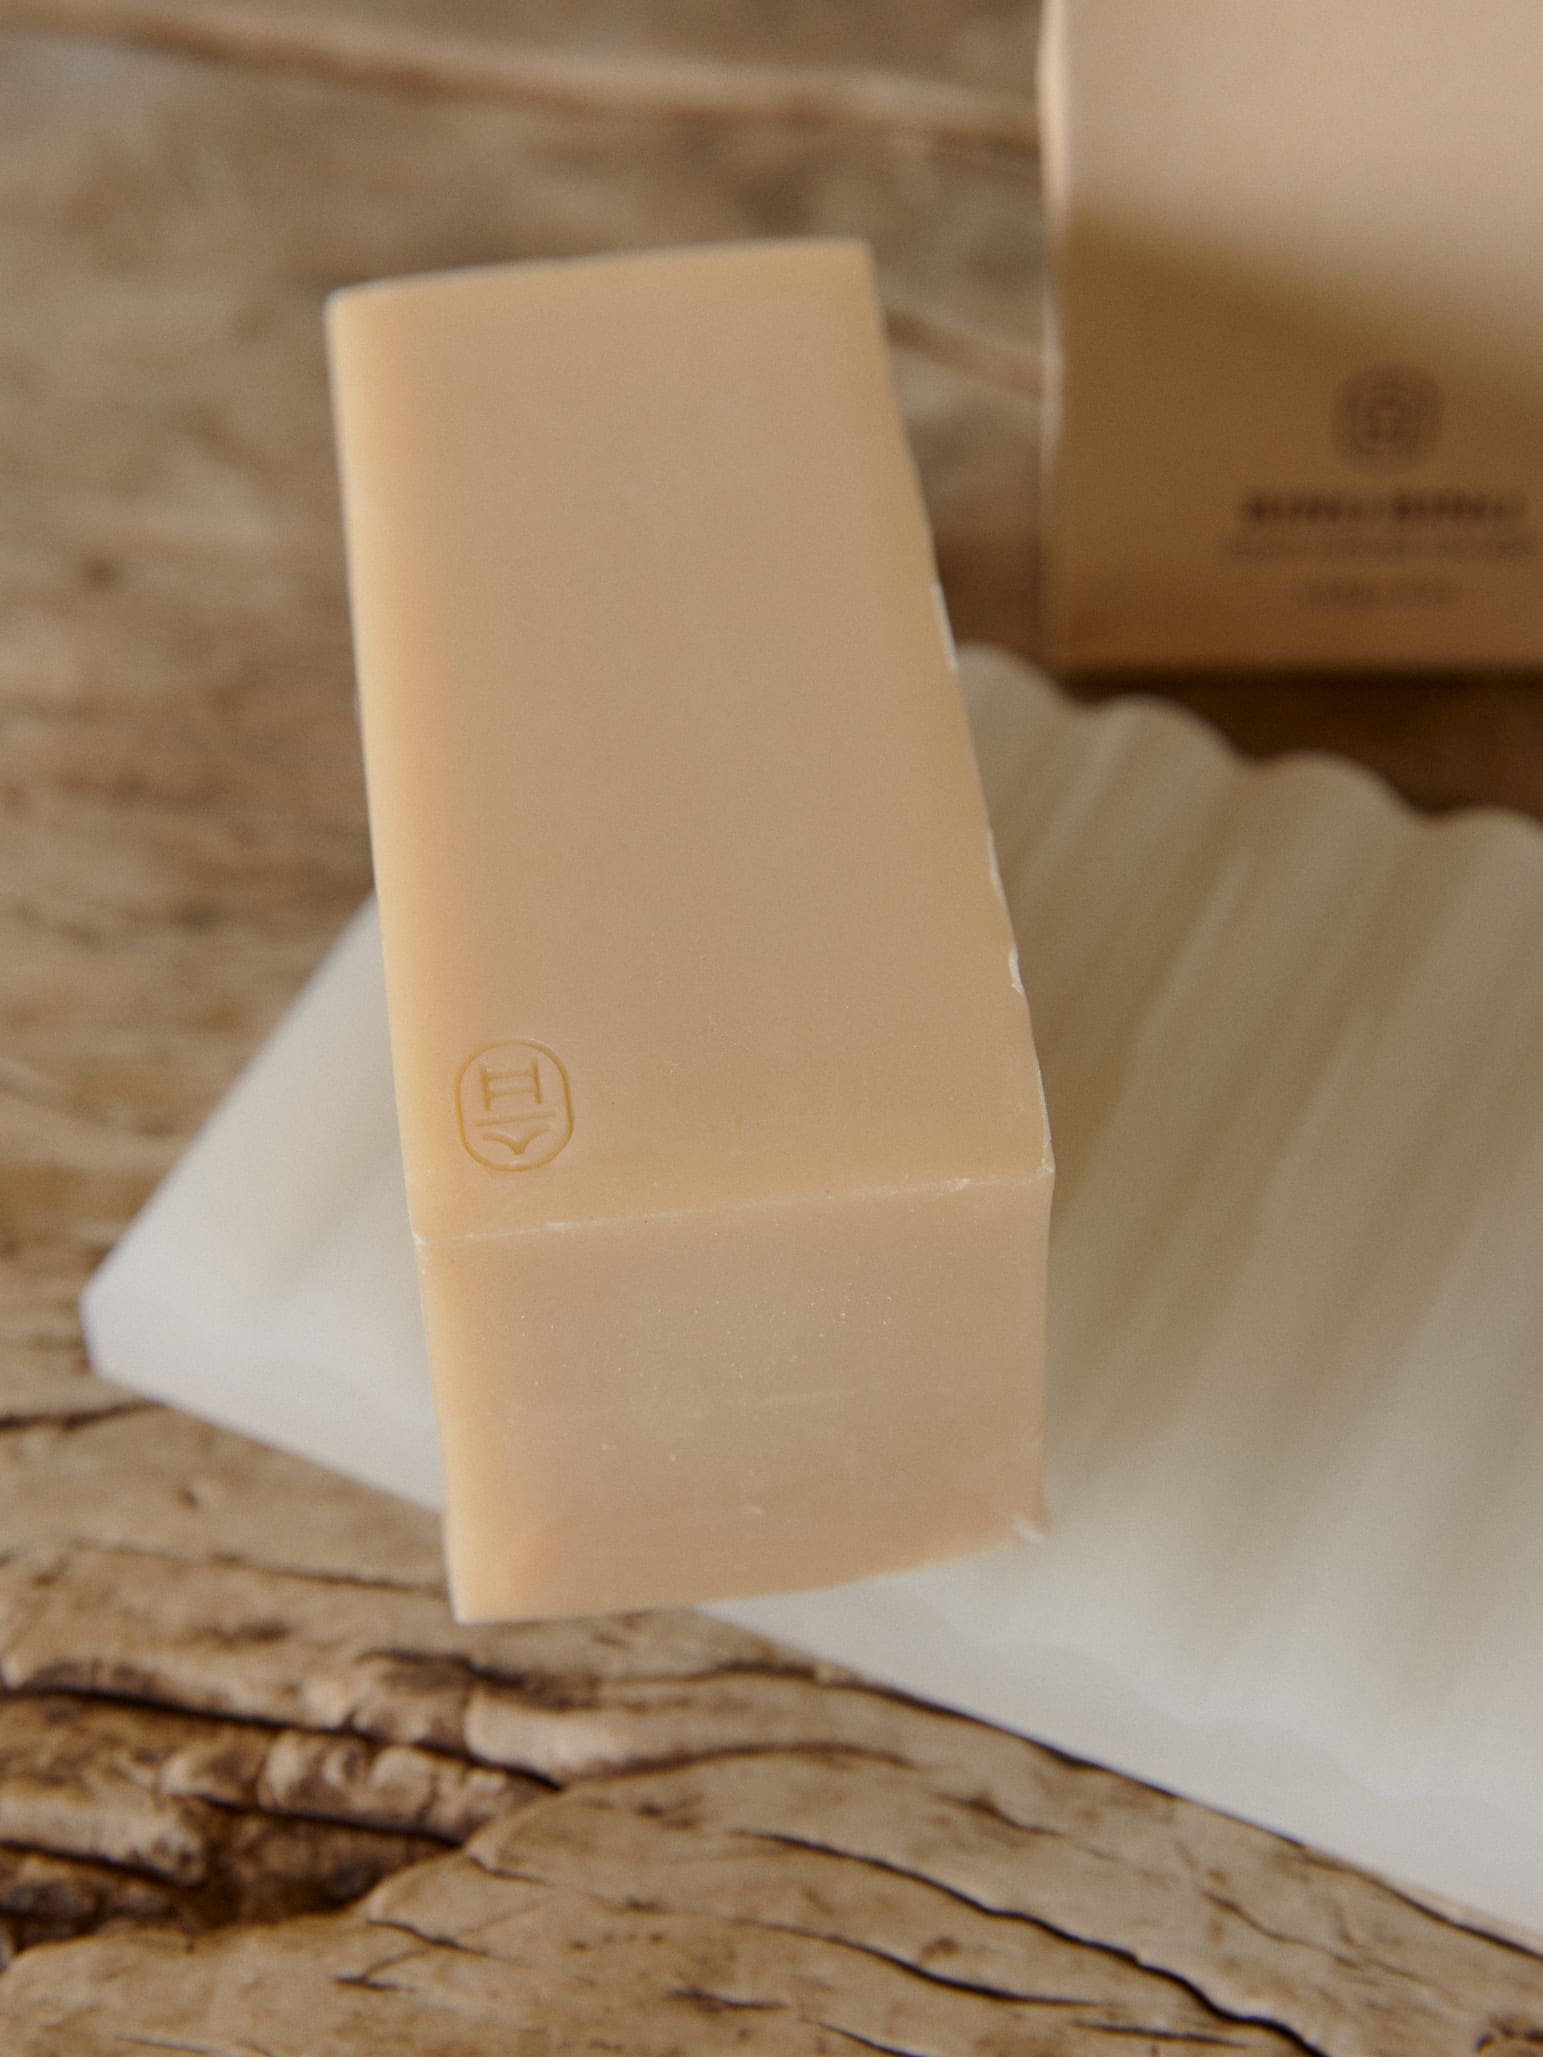 Boricha Tea Soap. Traditional, antioxidant-rich Korean tea made from roasted barley forms the basis of this conditioning soap alongside skin nourishing oils and purifying mountain clay.